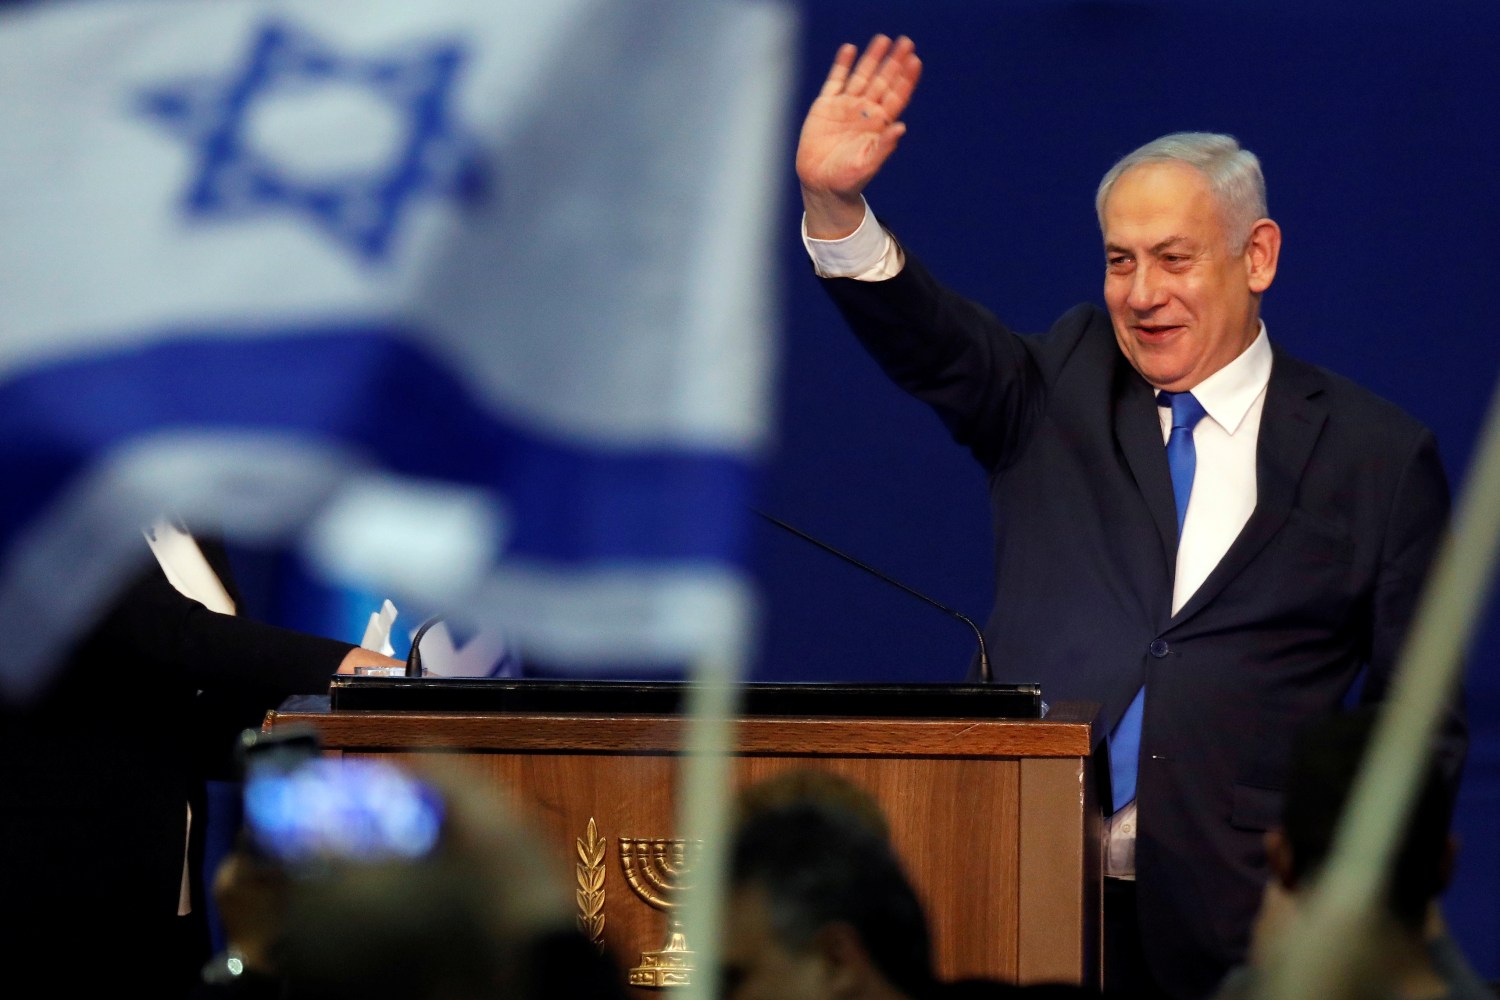 Israeli Prime Minister Benjamin Netanyahu waves to supporters following the announcement of exit polls in Israel's election at his Likud party headquarters in Tel Aviv, Israel March 3, 2020. REUTERS/Amir Cohen